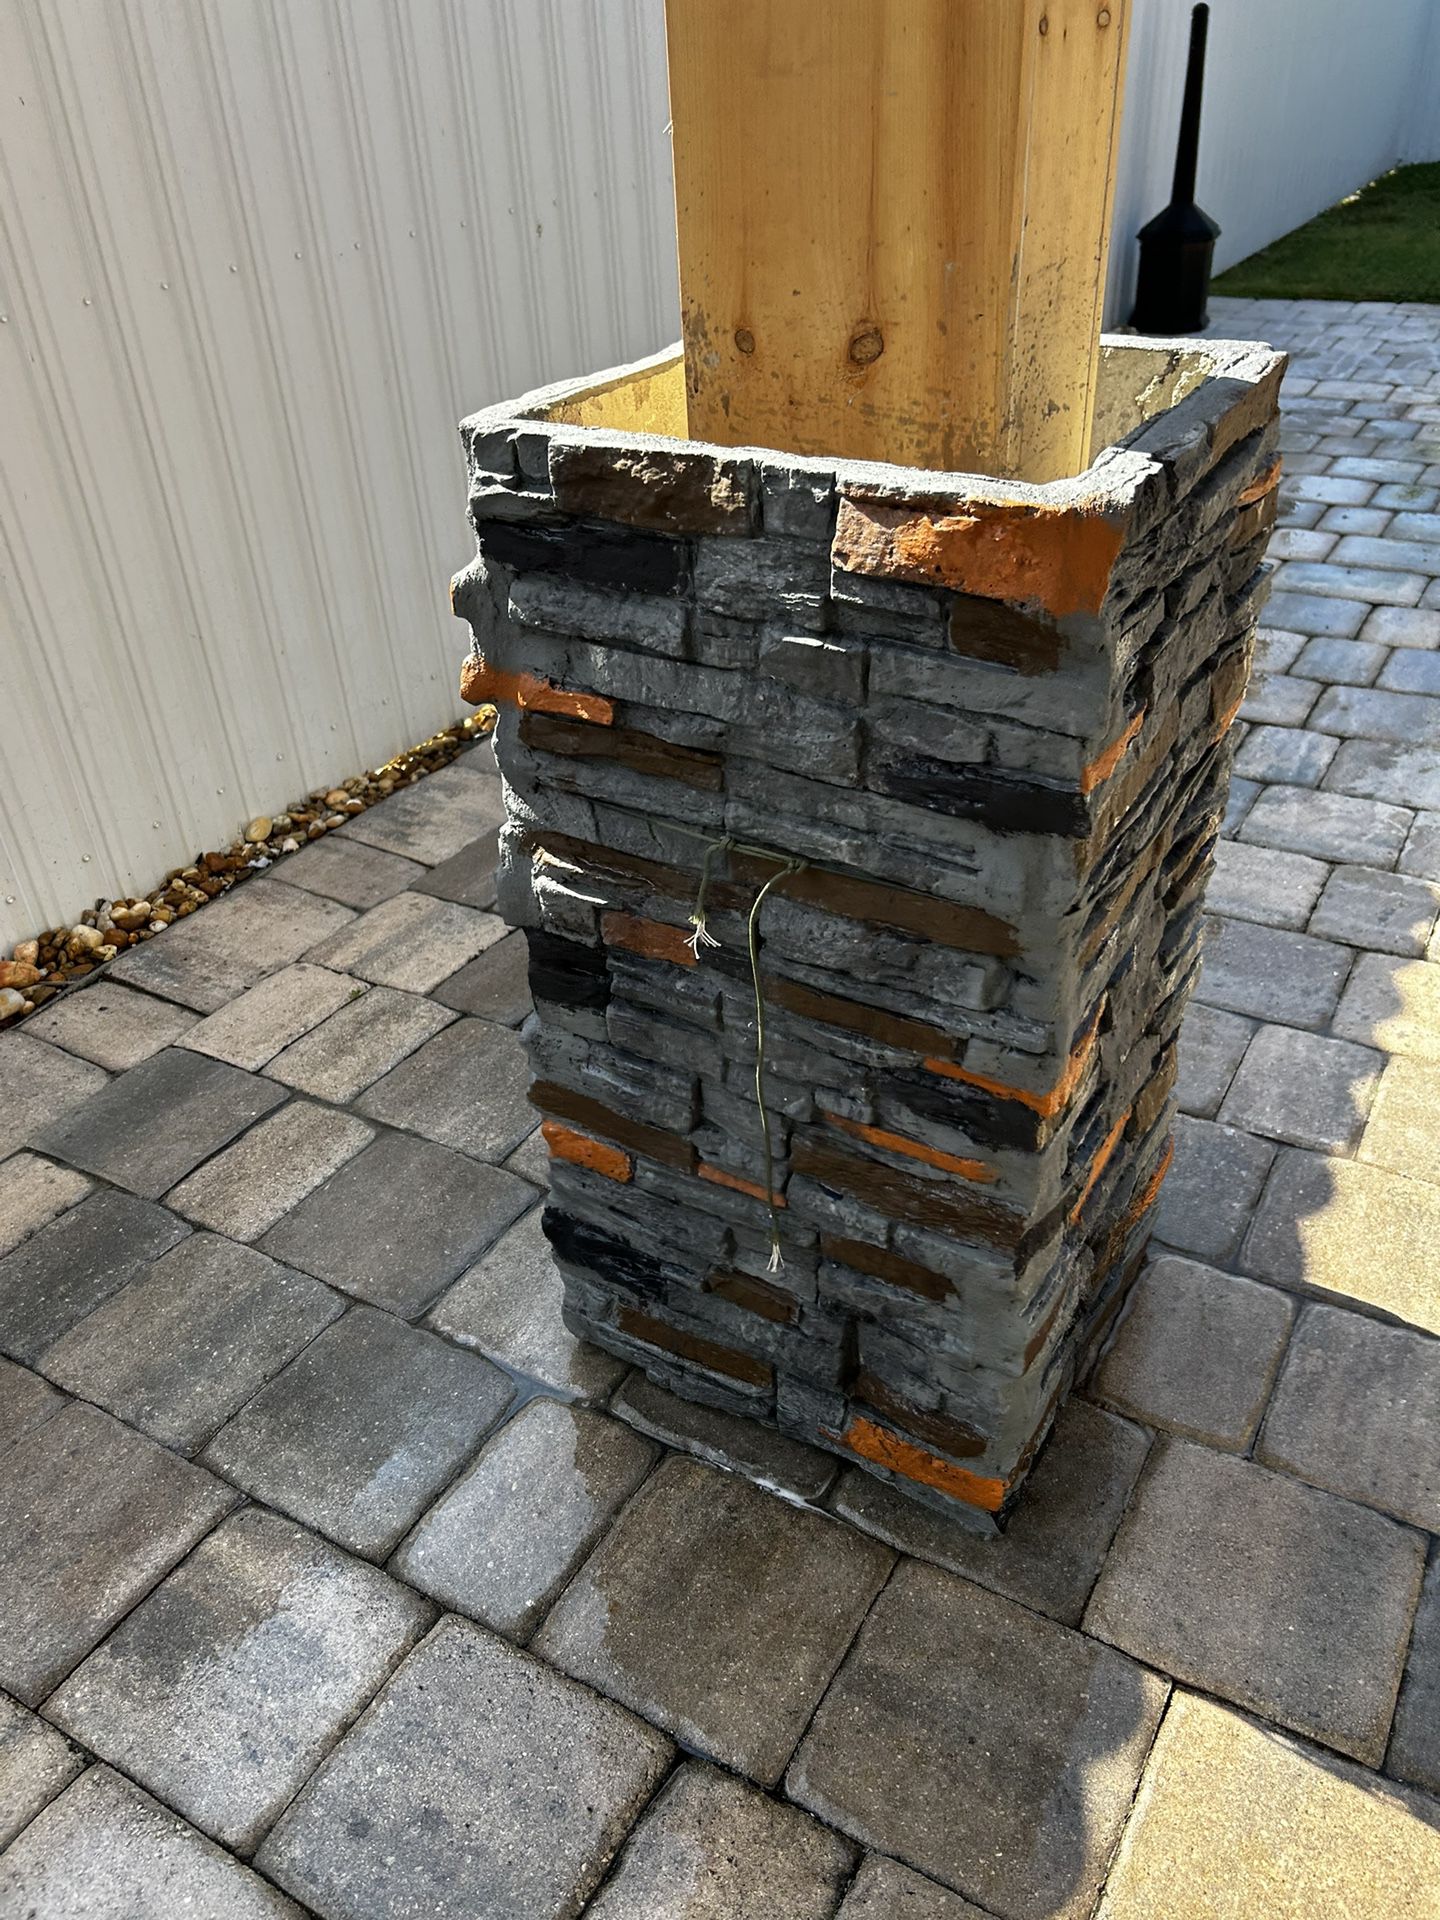 3ft Tall 20 Inch Wide Concrete Stone Veneer Slabs For Pillars 4 Slabs Make One Pillar  Brand New Free Delivery $300 A Pillar Installation Available 